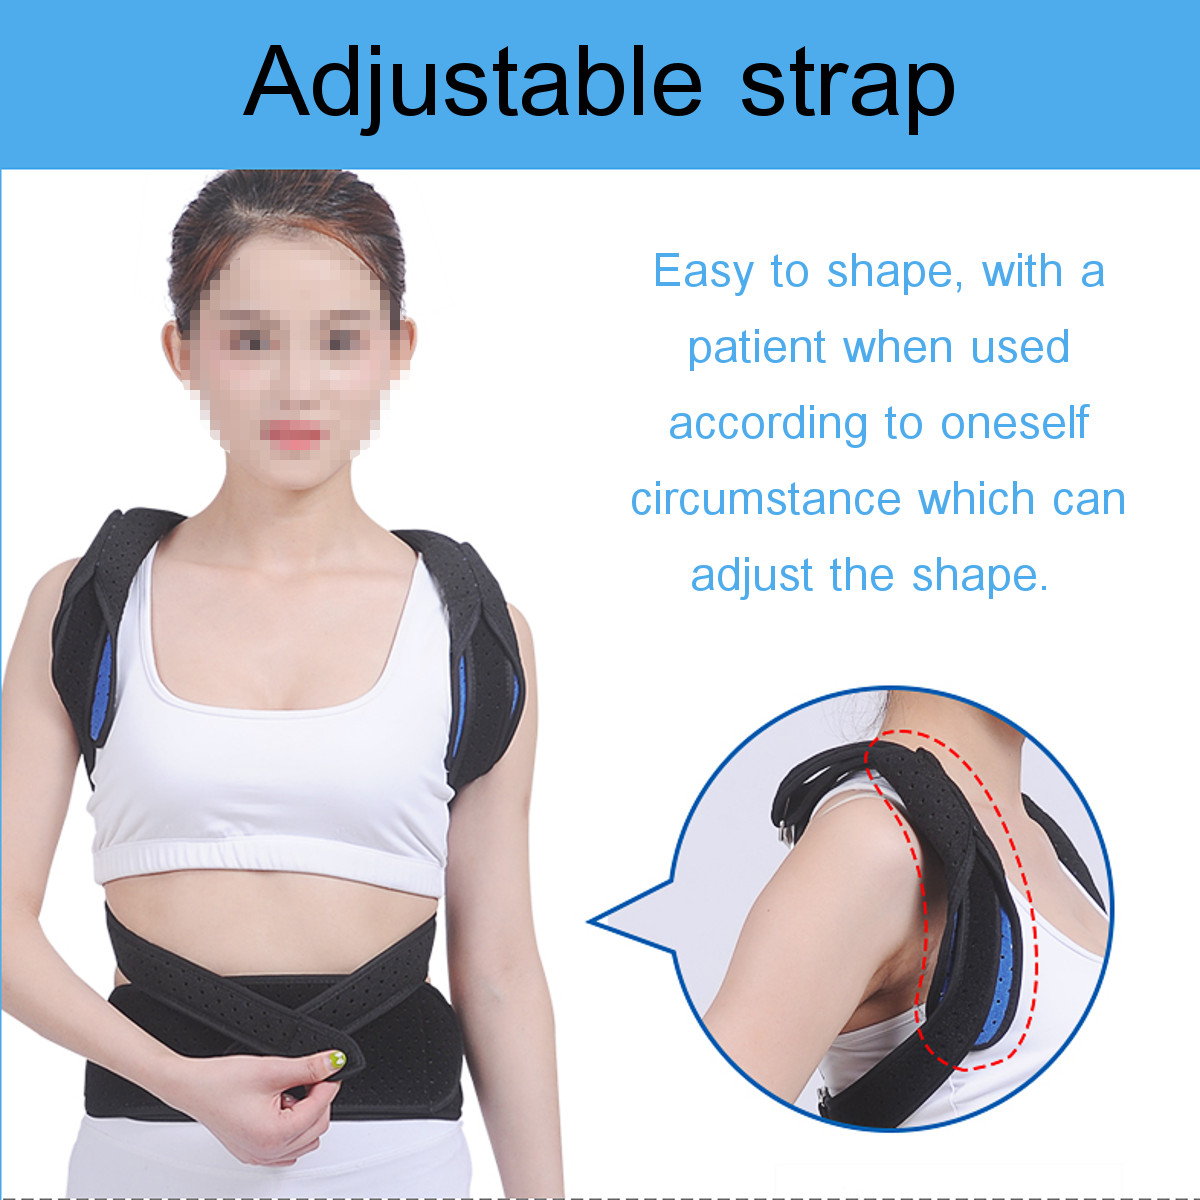 Spinal-Brace-Support-Spine-Recover-Orthotics-Kyphosis-Posture-Corrector-1259435